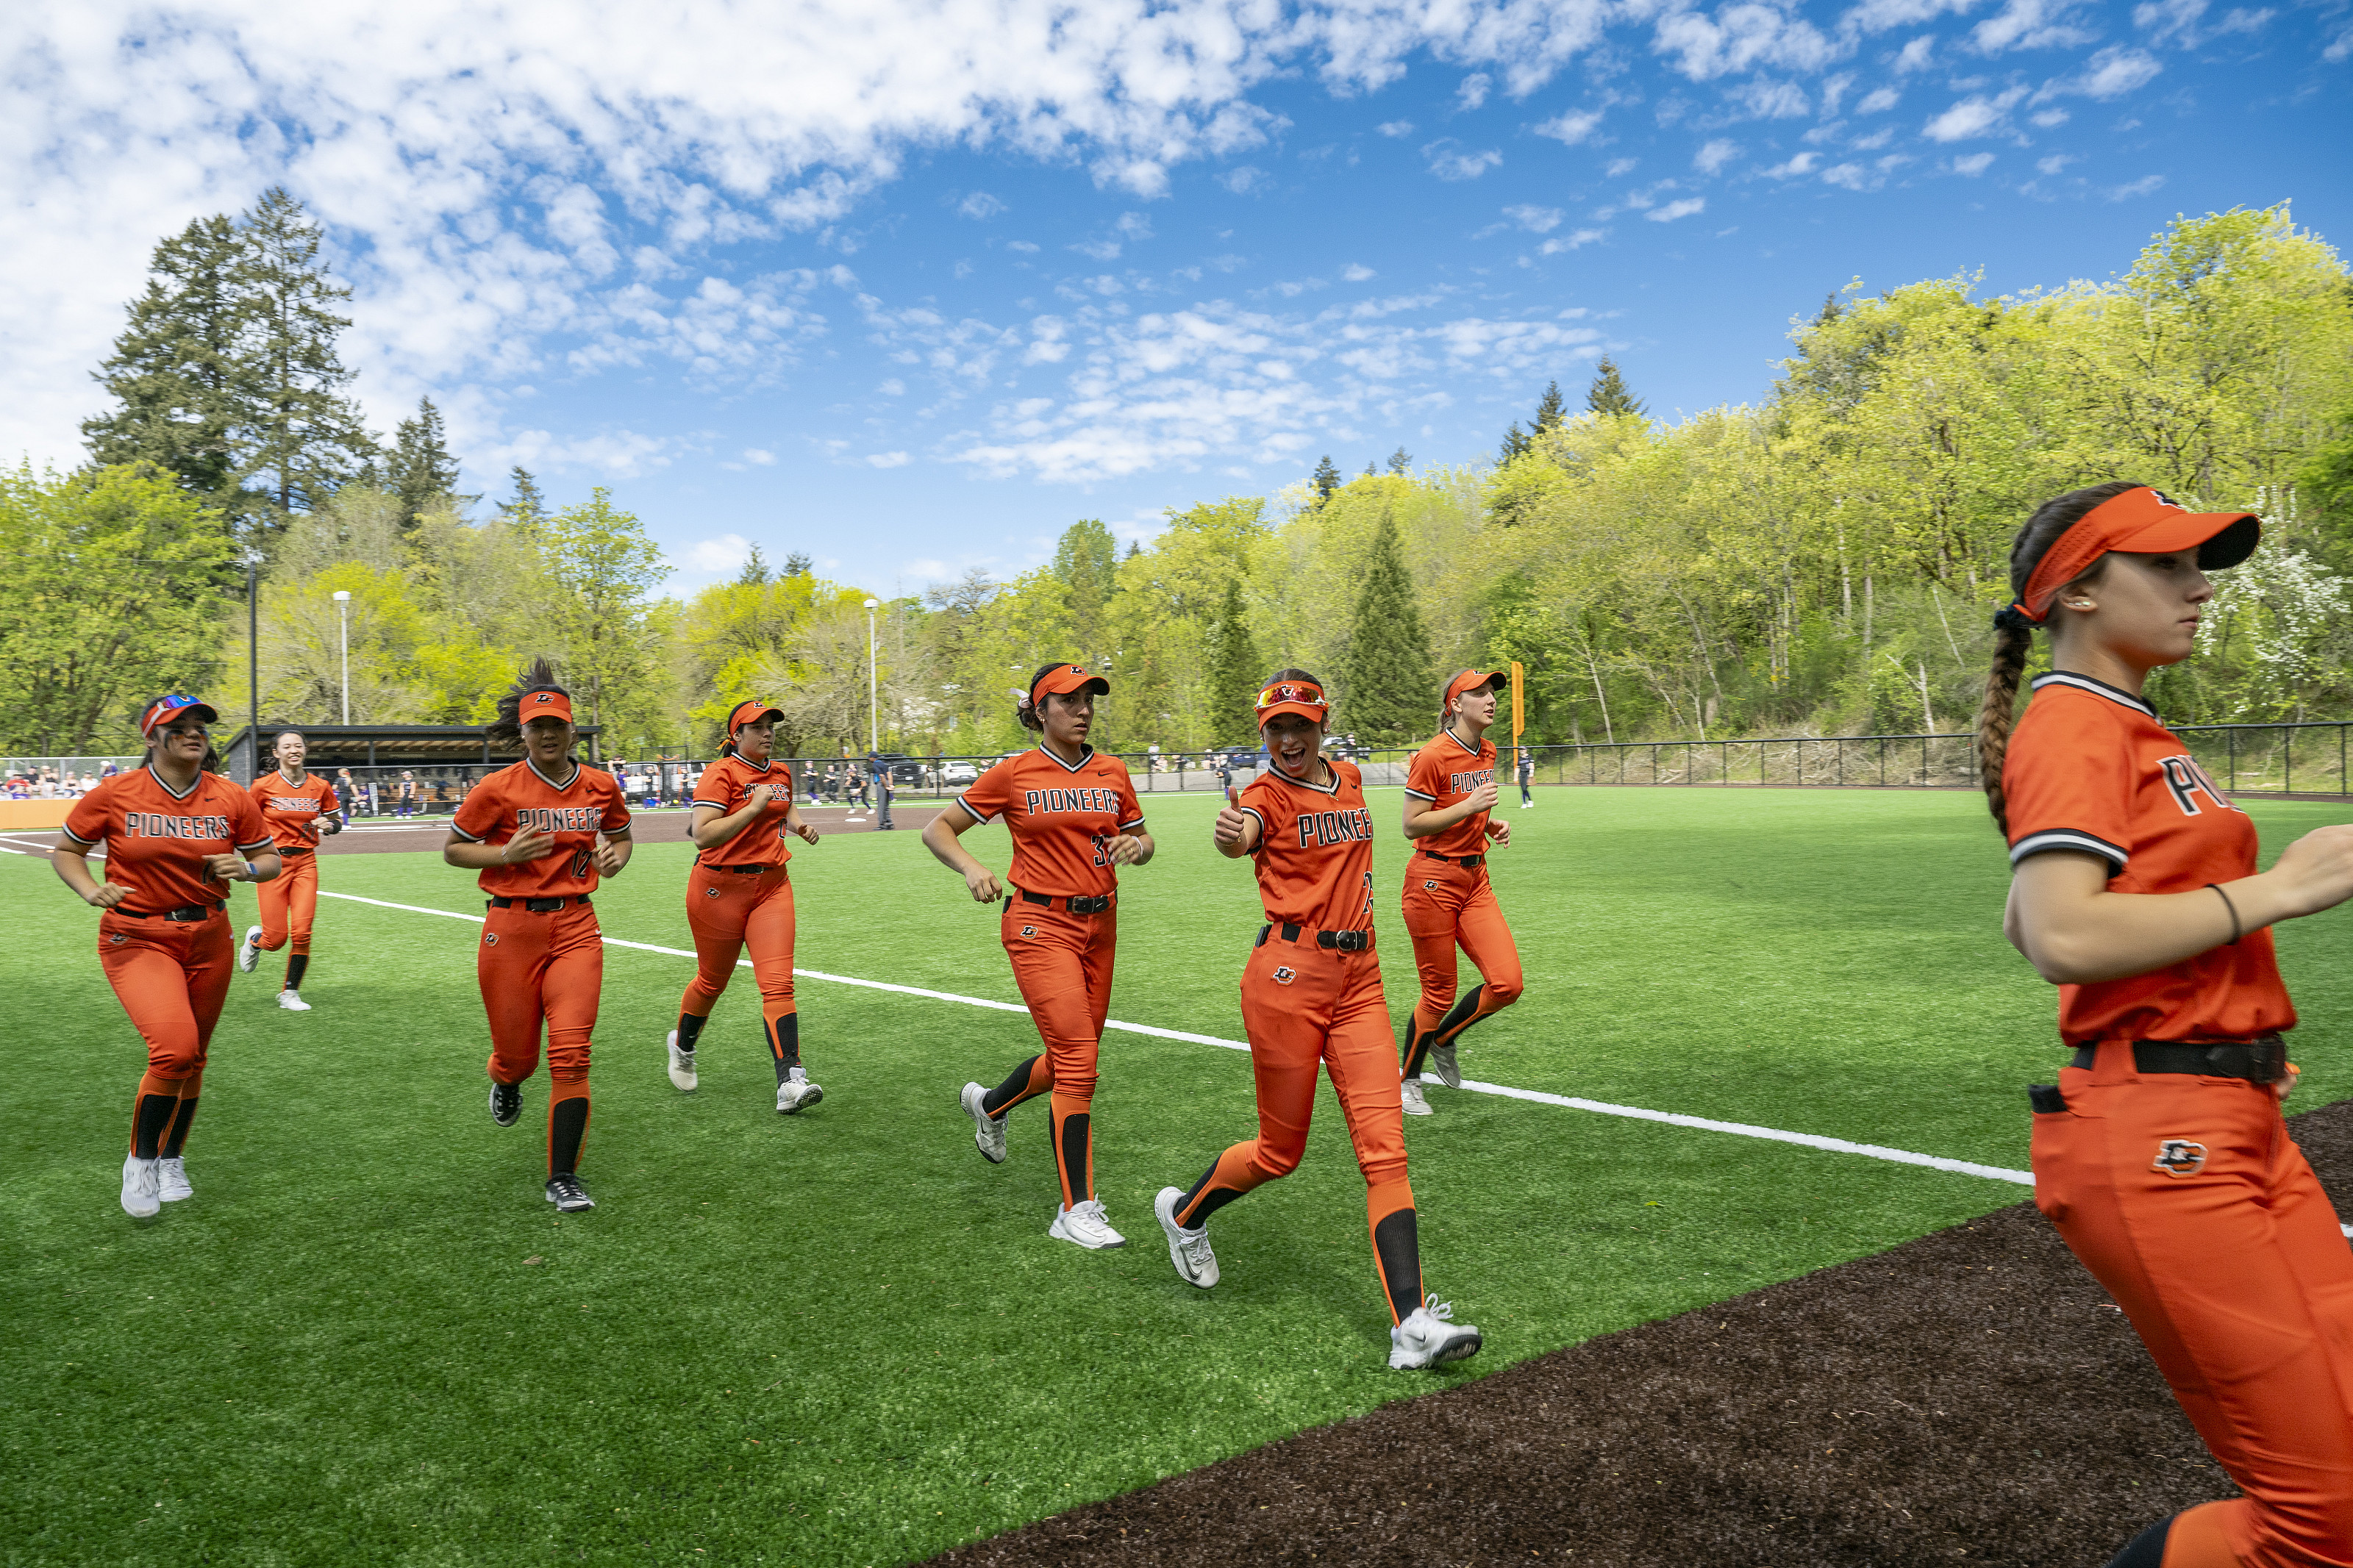 Softball players running on the field in orange uniforms. One of the players is giving a thumbs up to the camera.